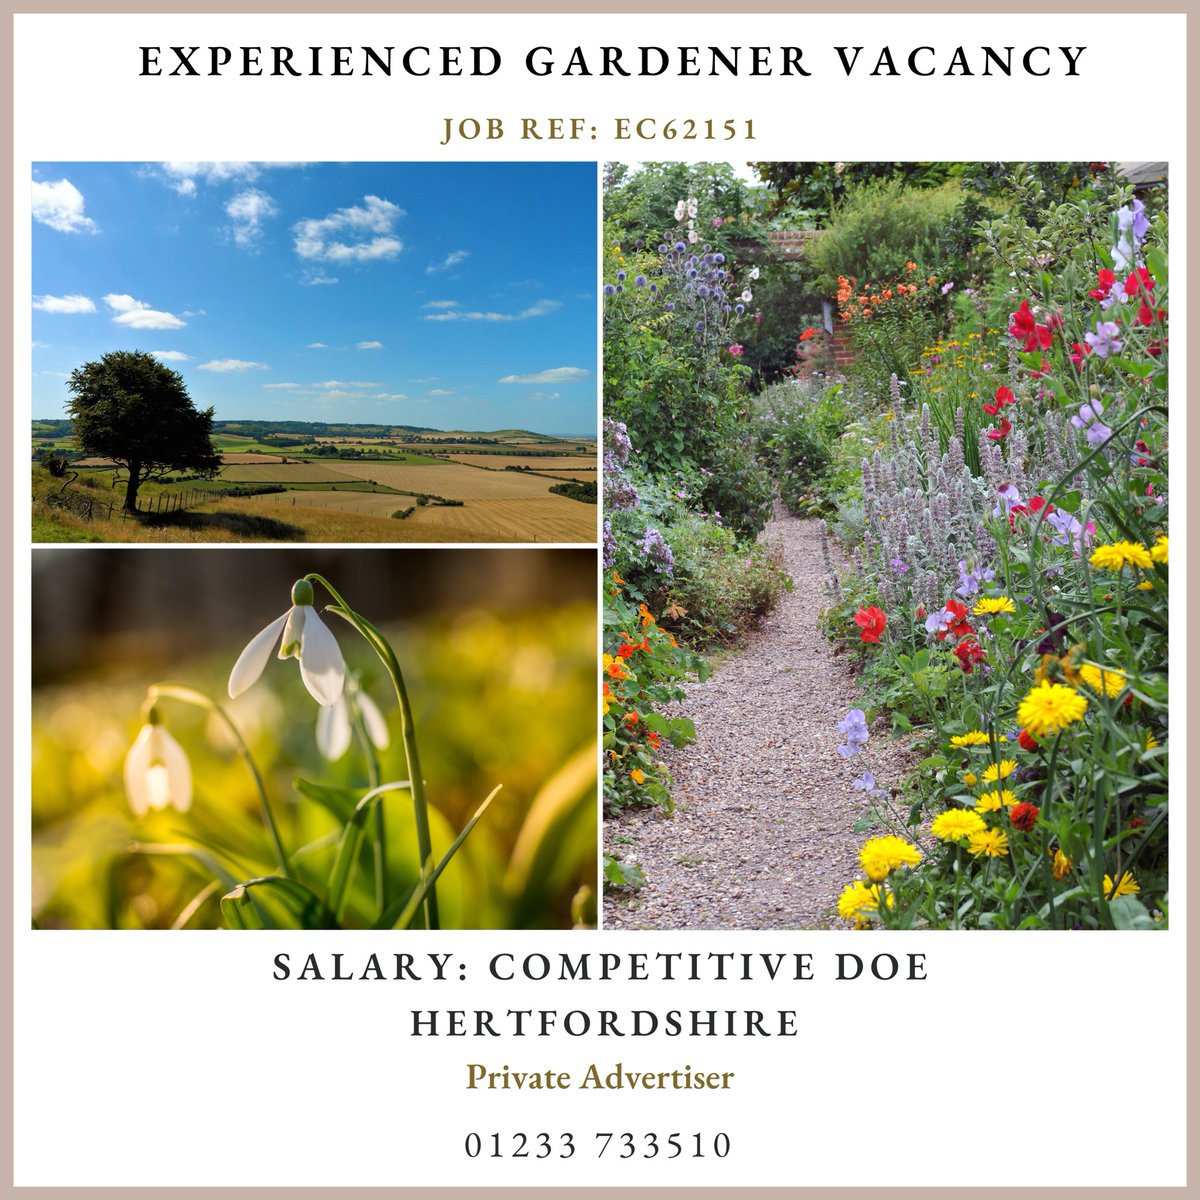 Experienced and hard-working professional gardener sought for a private estate in the Hertfordshire Green Belt.

EC62151 englishcountrygardeners.co.uk/job/gardening-…

#horticulturalist #horticulturejobs #horticulturaljobs #horticulture #gardening